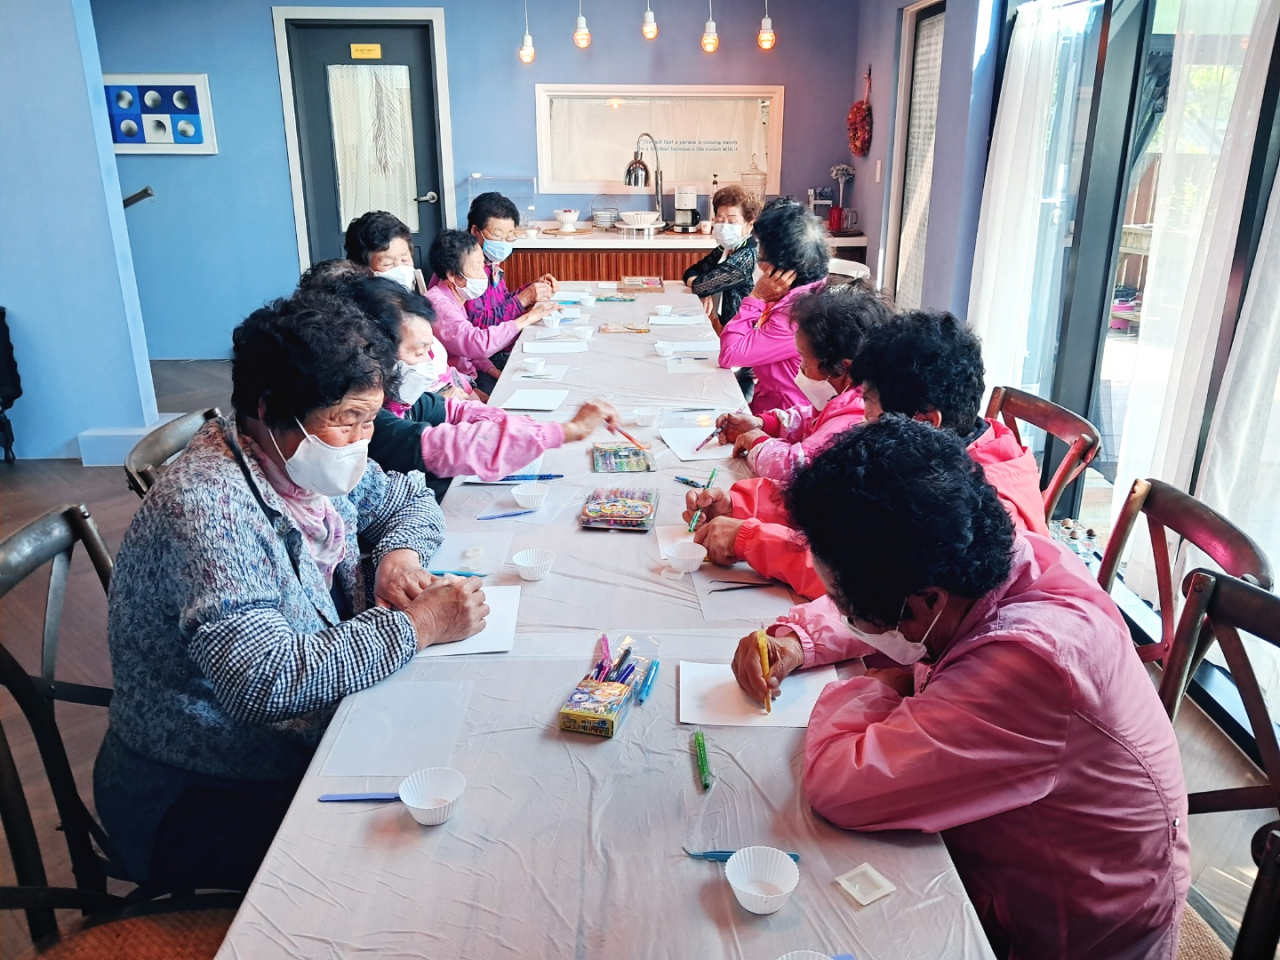 Sinpung grandmothers start drawing with the theme of the fall season during an art class on Sept. 28. (Lee Si-jin/The Korea Herald)